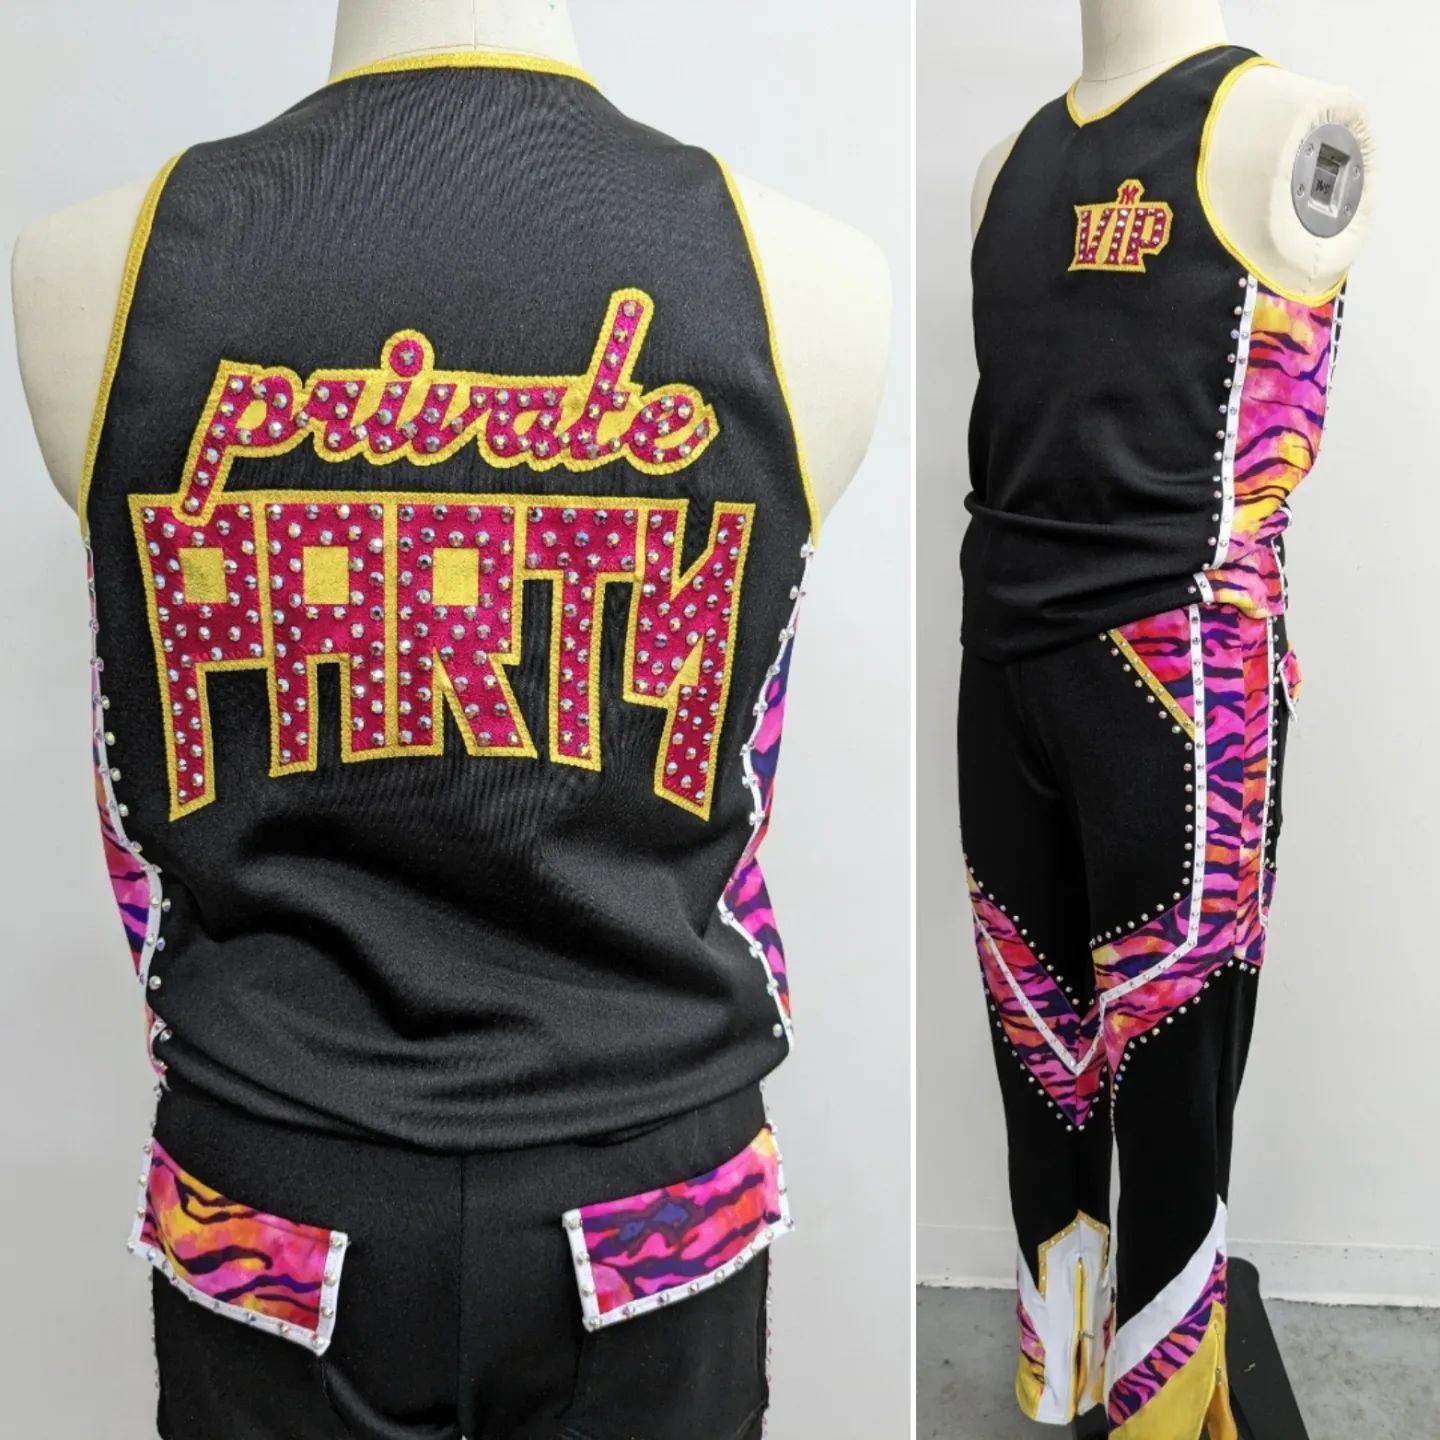 Close up shots of the new gear for Private Party!! Love working with @isiahkassidy and @tmquen !!
🖤💕💛💕🖤
#aew @aew #prowrestlinggear #customwrestlinggear #wrestlinggear #privateparty #tagteam